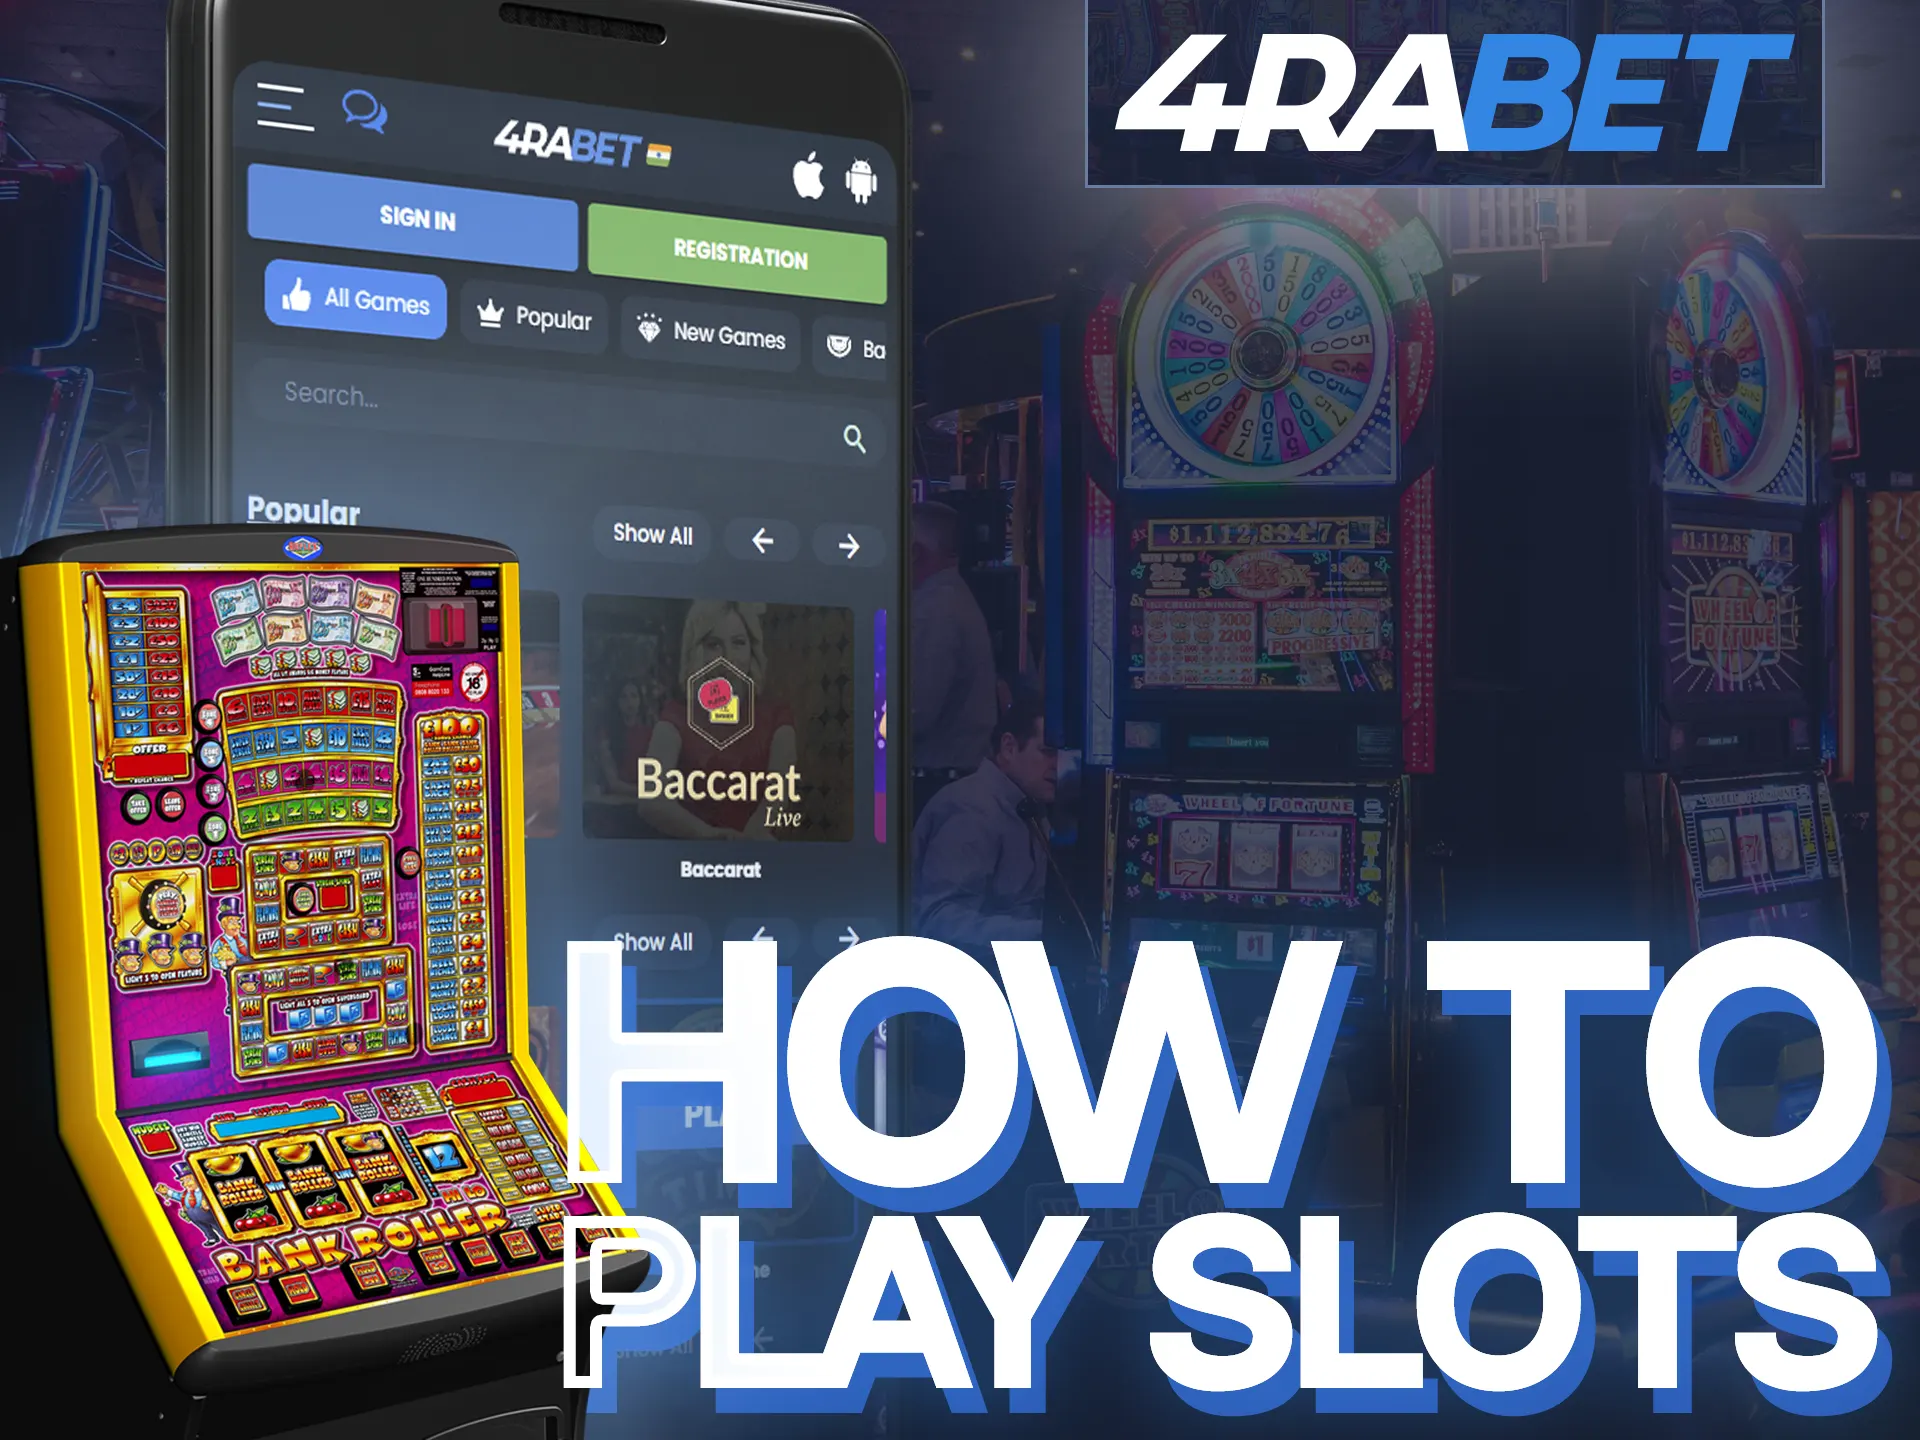 Learn how to play slots on the 4Rabet mobile app.